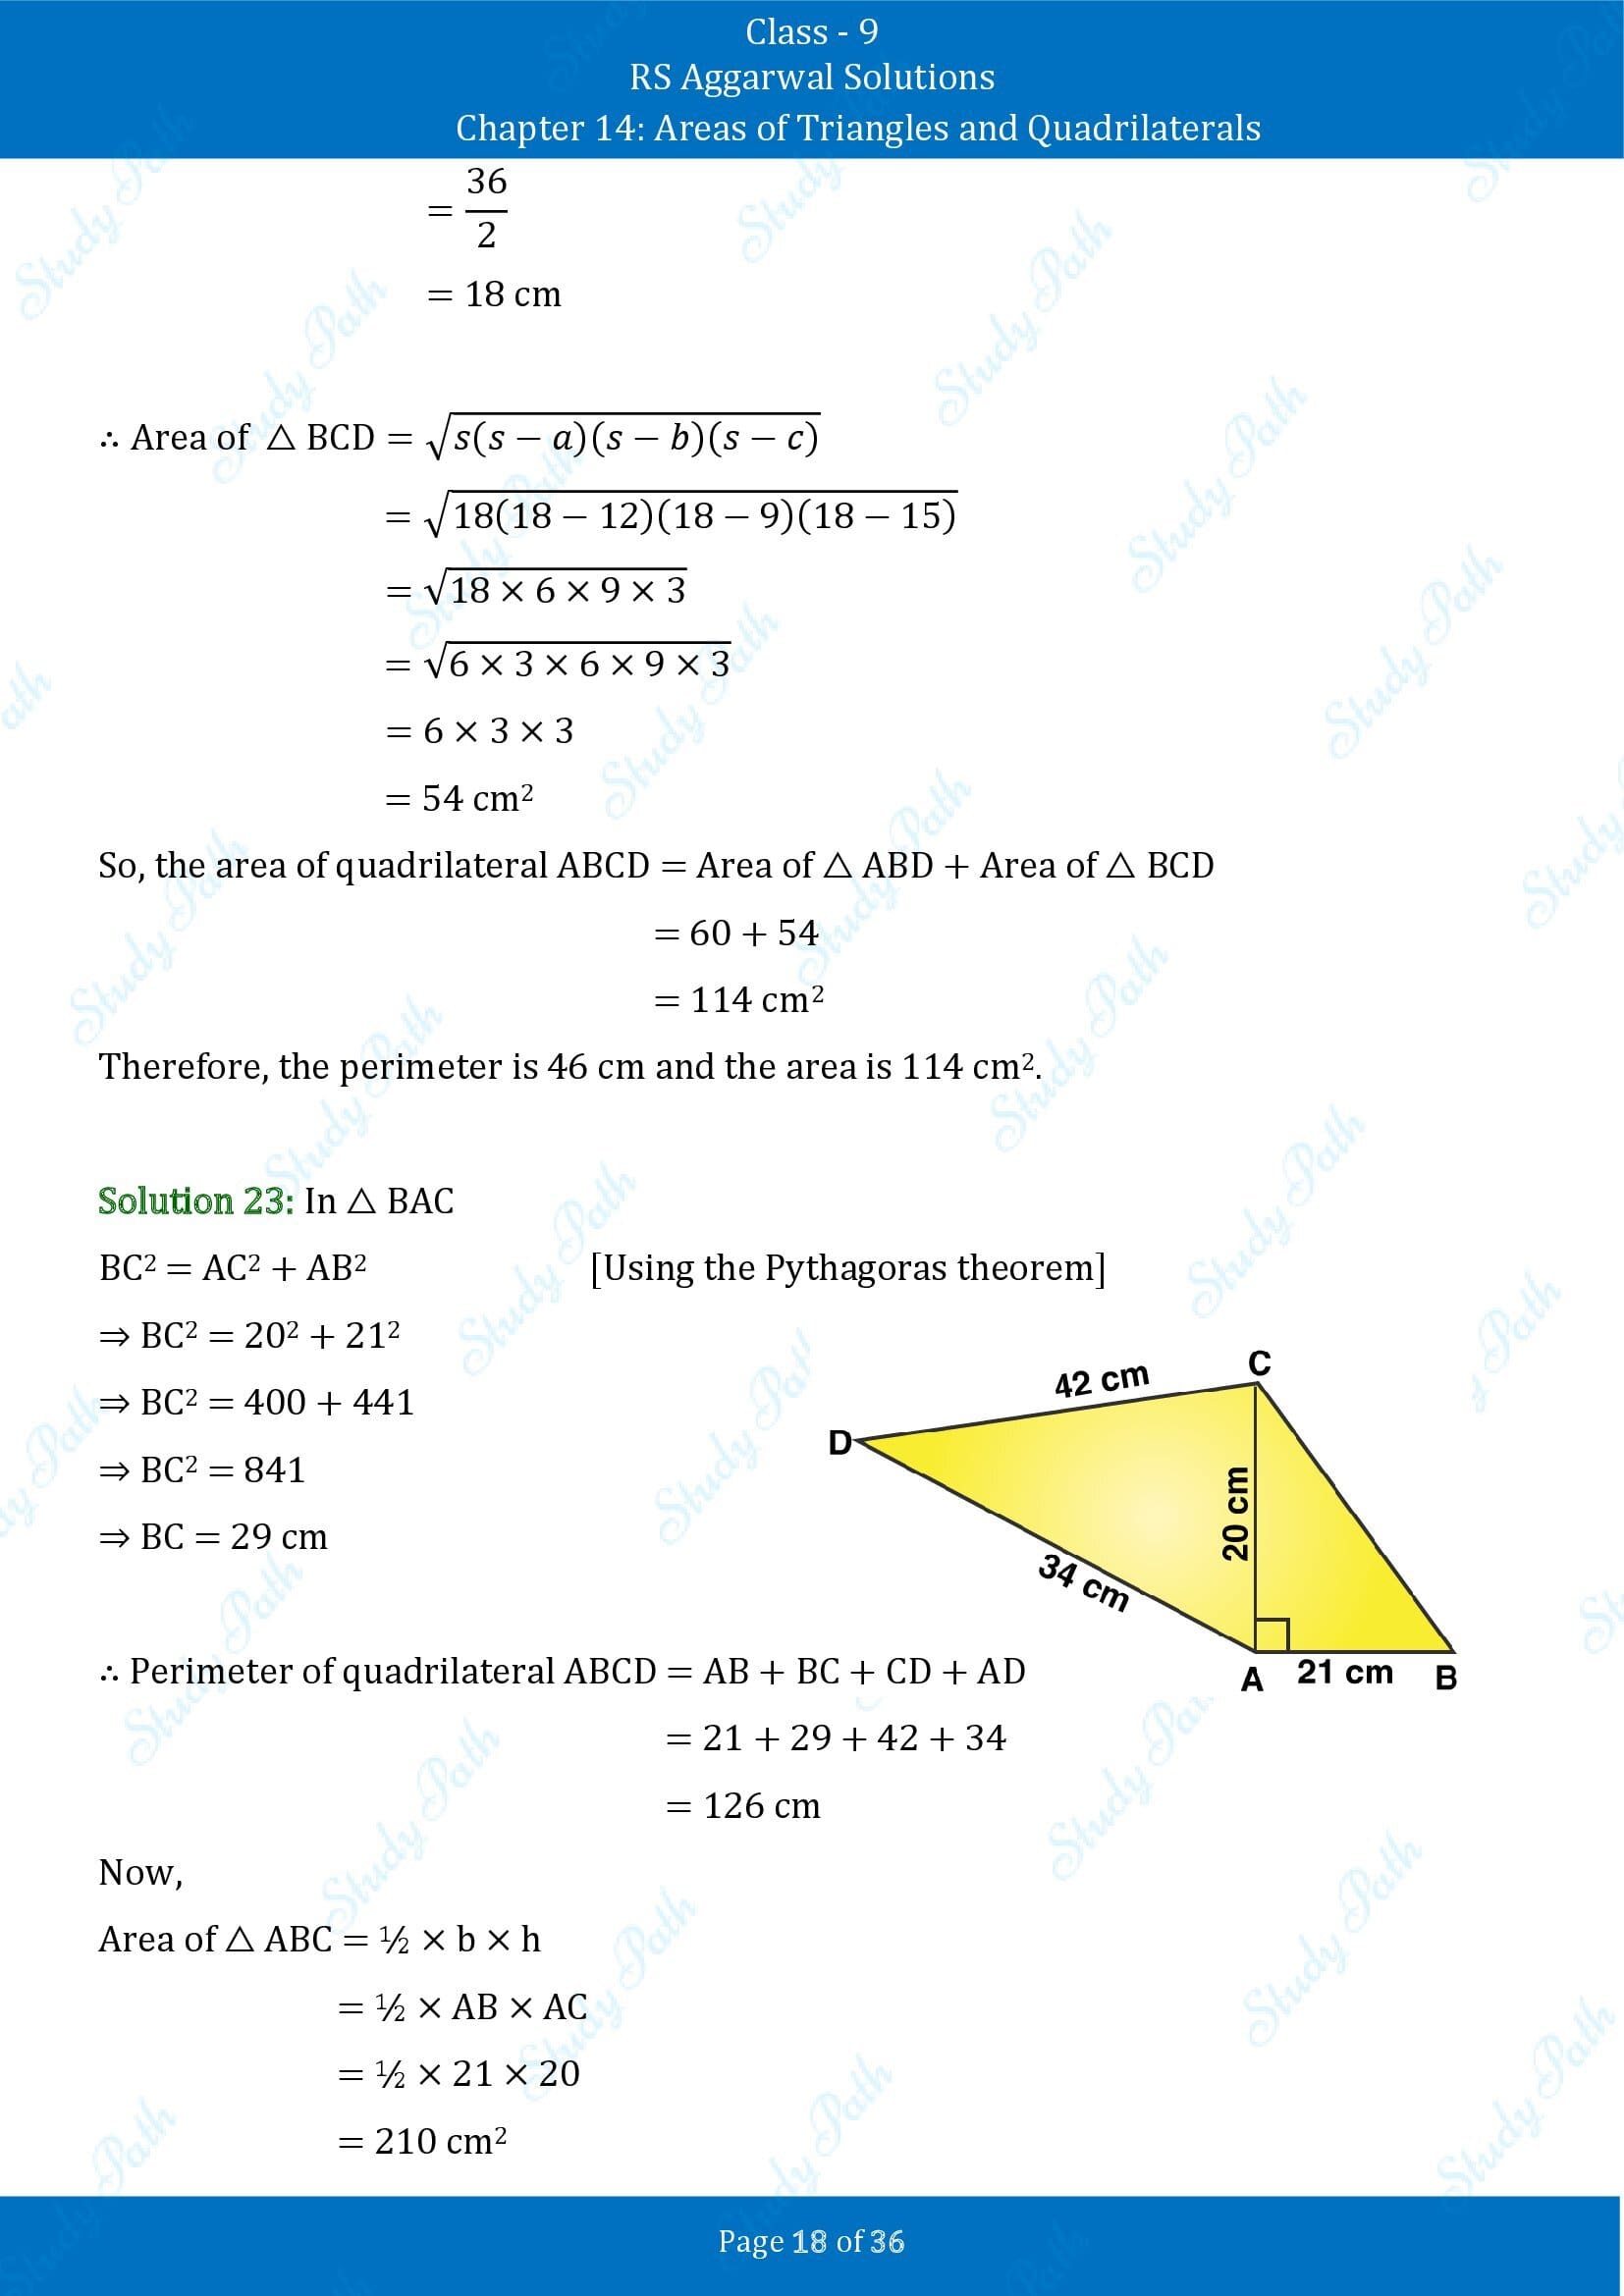 RS Aggarwal Solutions Class 9 Chapter 14 Areas of Triangles and Quadrilaterals Exercise 14 00018